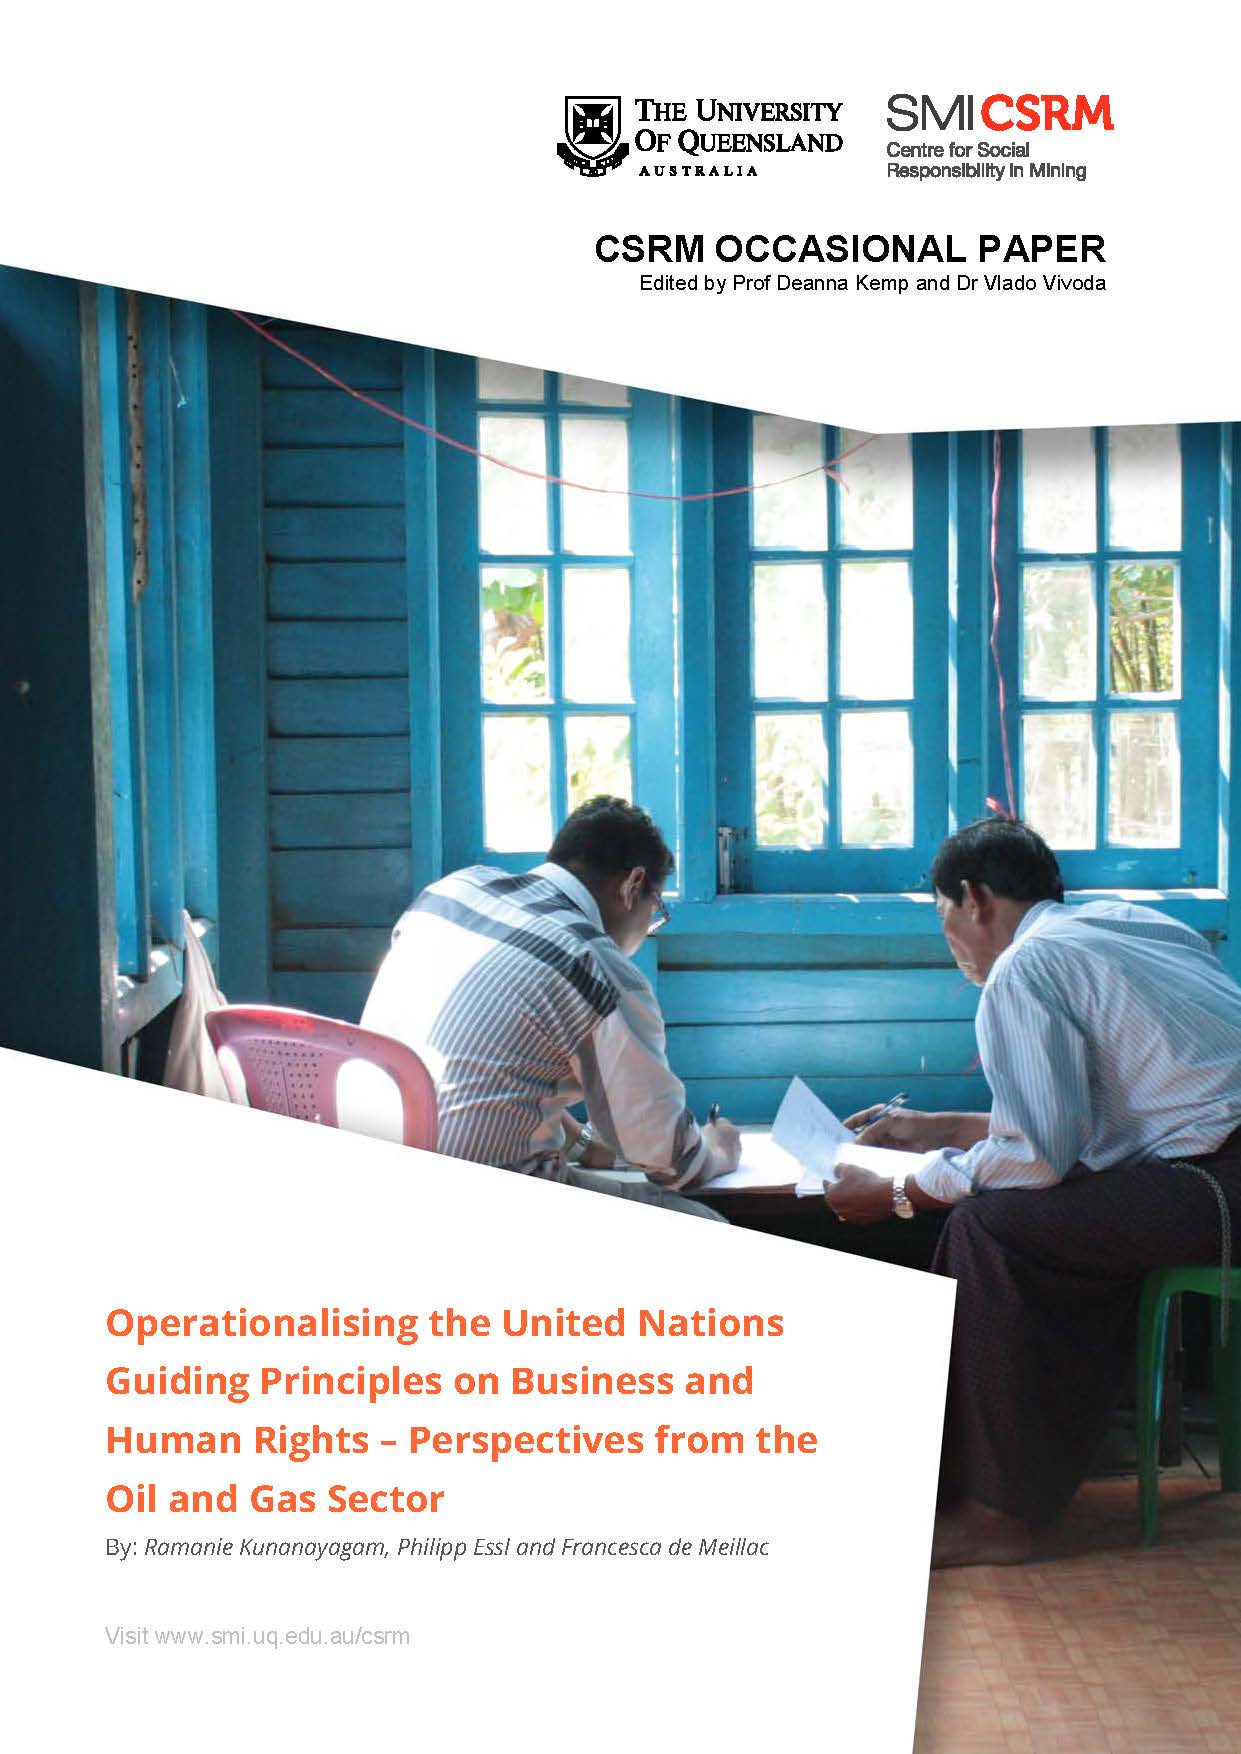 Operationalising the United Nations Guiding Principles on business and human rights